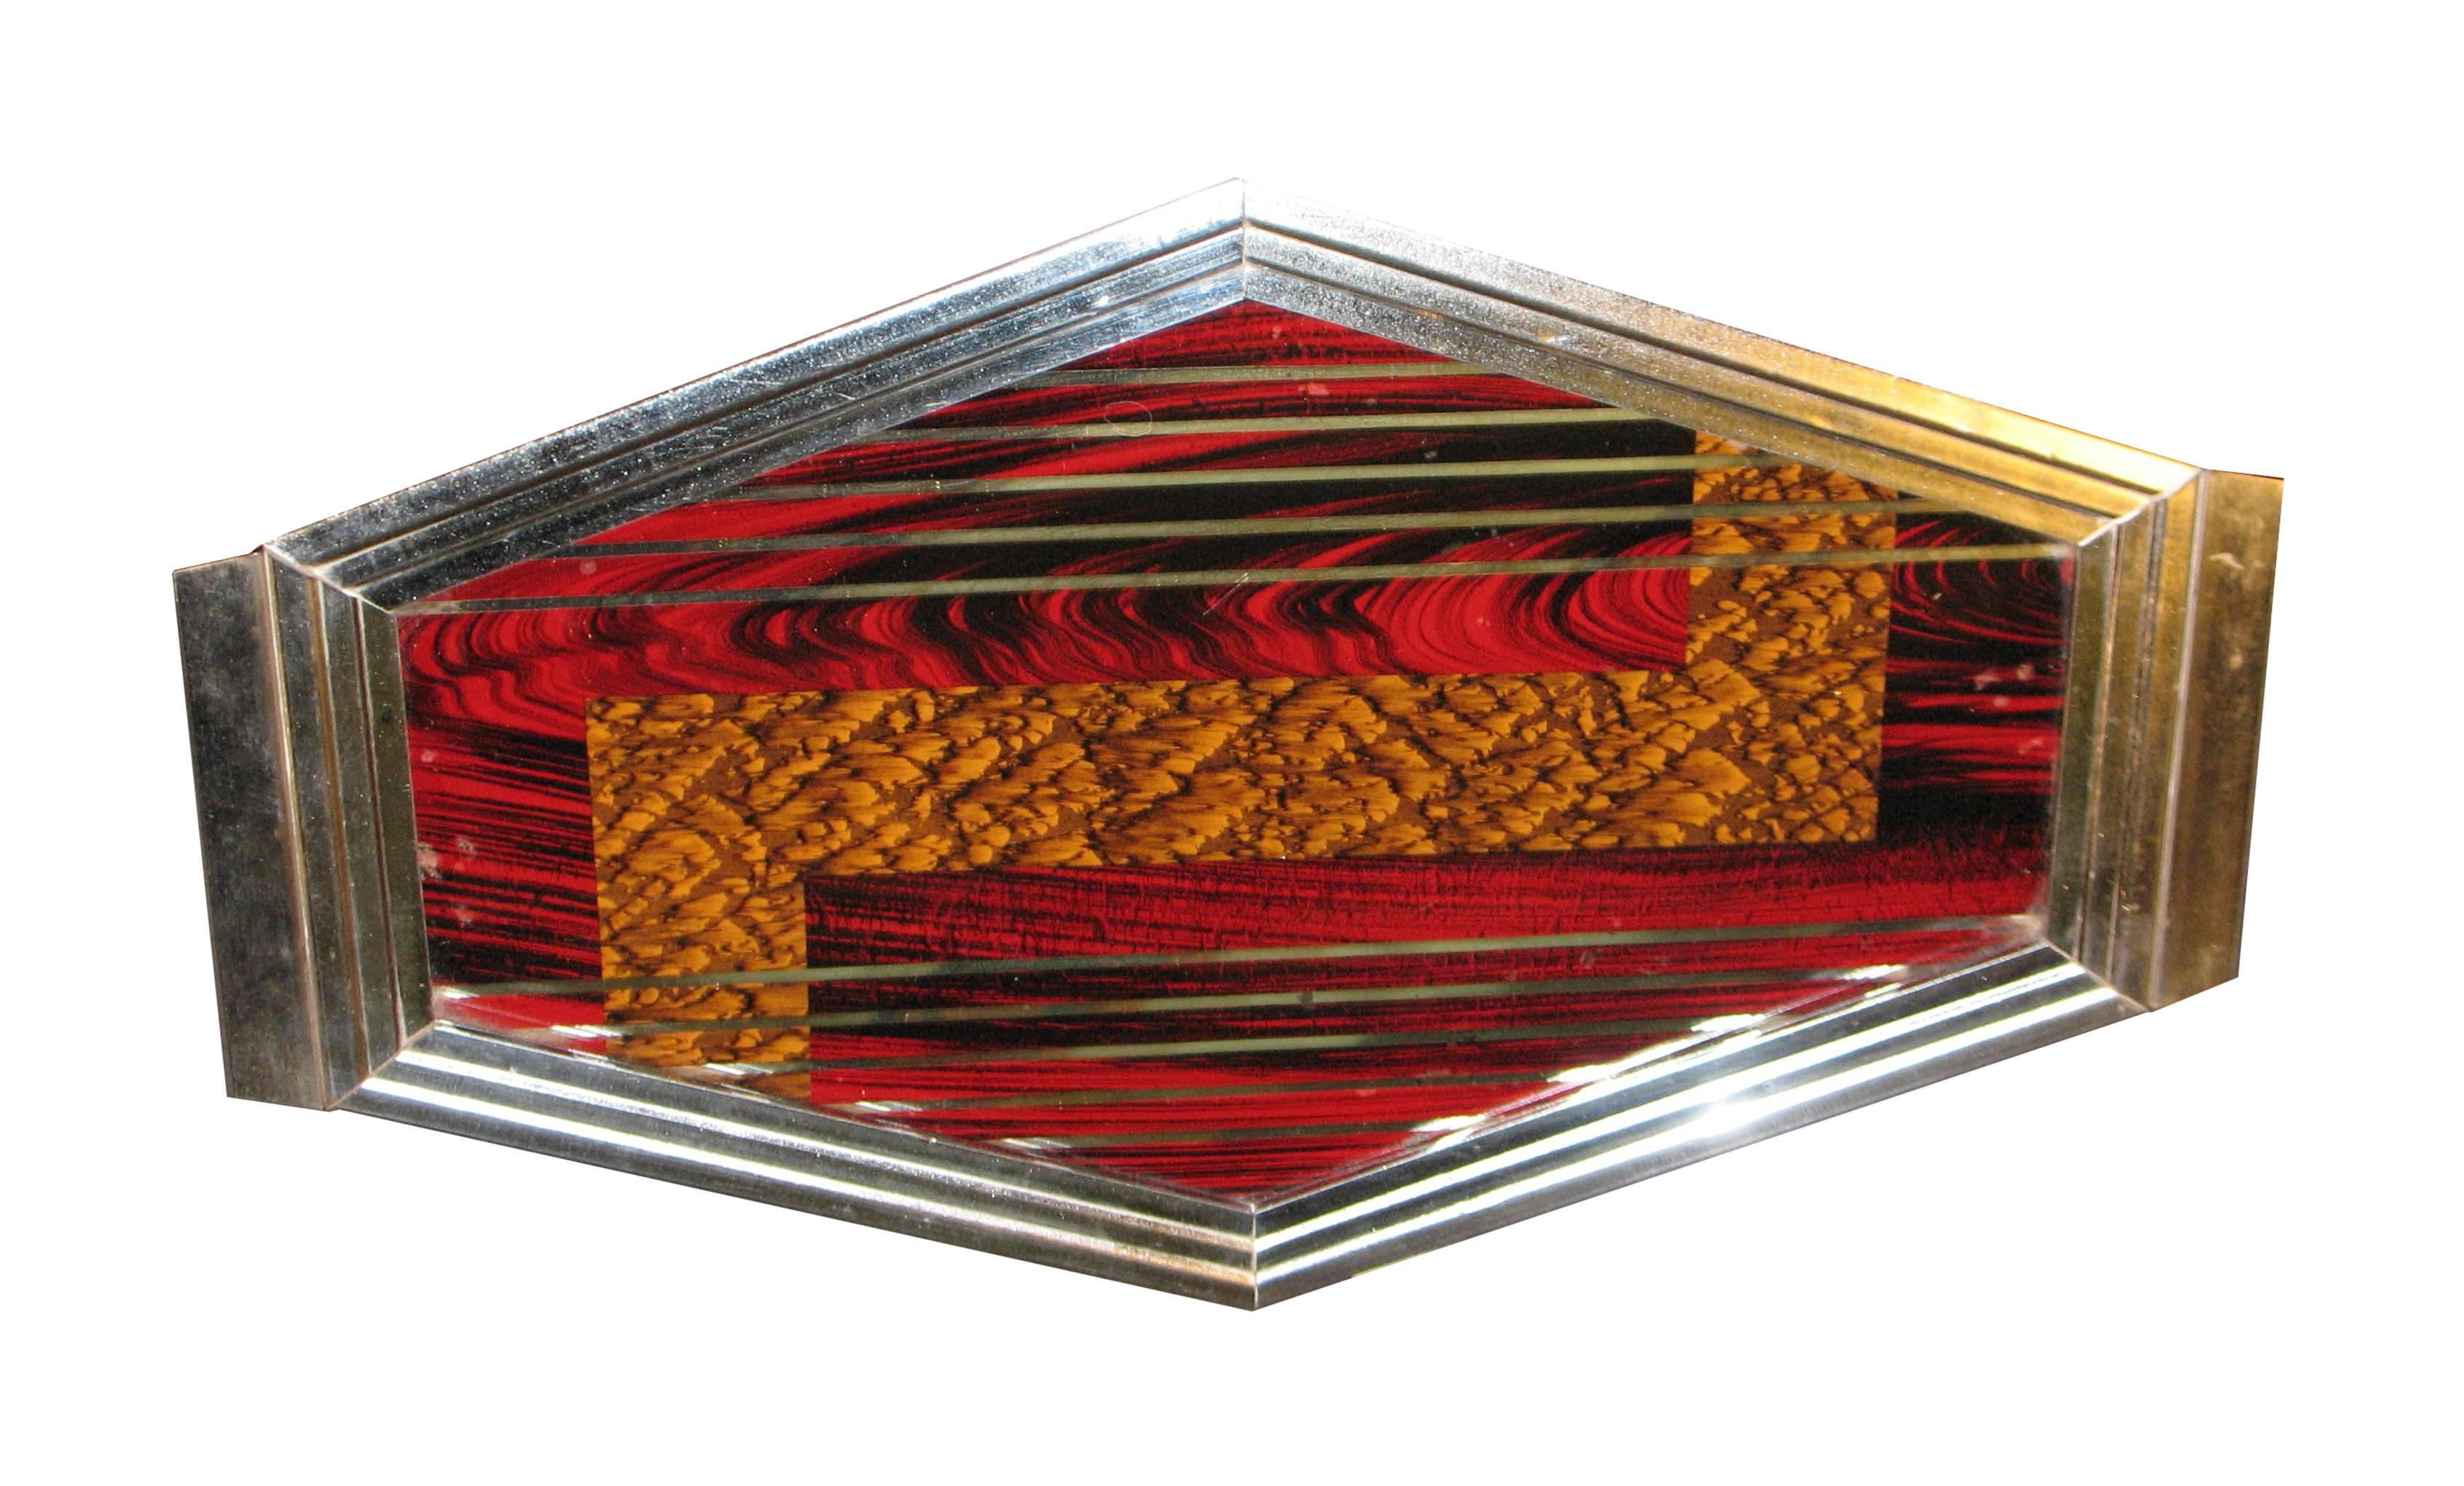 Magnificently crafted French Art Deco marquetry tray from the 1920s-1930s with different exotic woods and chromium plated fillets in geometrical order under glass. 
Hexagonal shape with a stepped, nickel-plated gallery with handles.
Good used